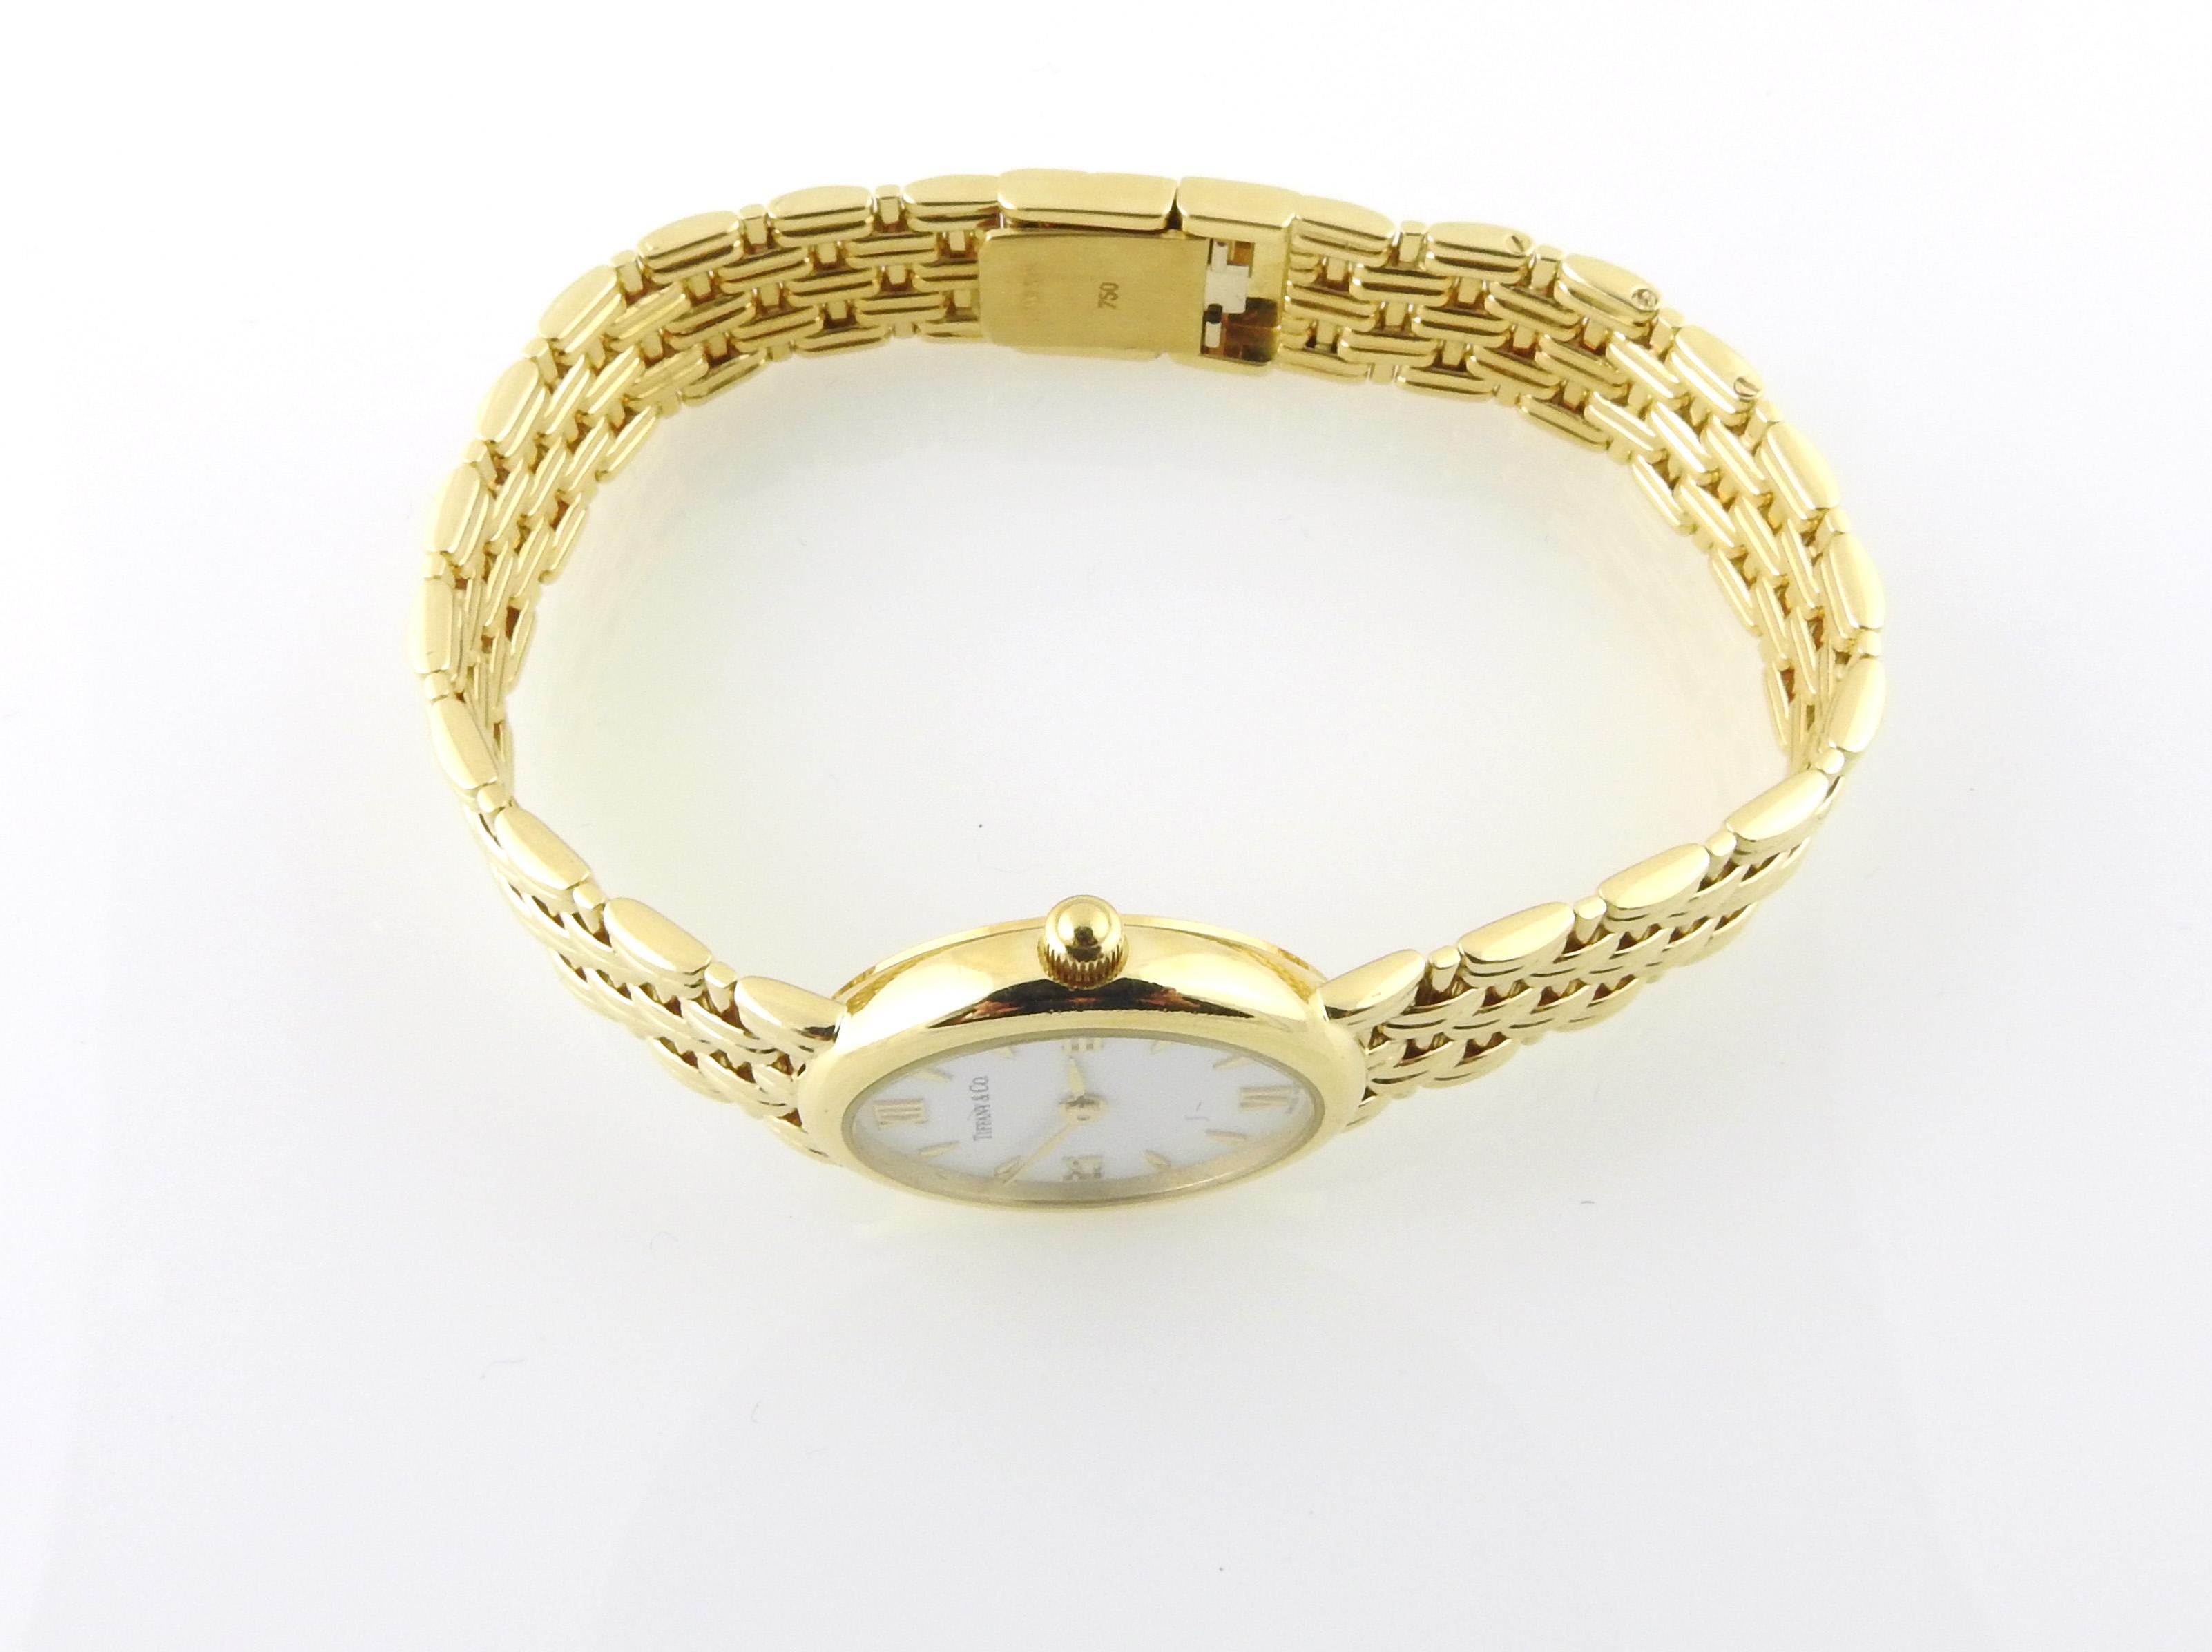 Tiffany & Co. 18K Yellow Gold Ladies Watch

This classic ladies Tiffany watch is set in elegant 18K yellow Gold

Oval case is approx. 22.5 mm x 19.5mm

18K yellow gold band is in a basket weave design - fits up to 6 1/4